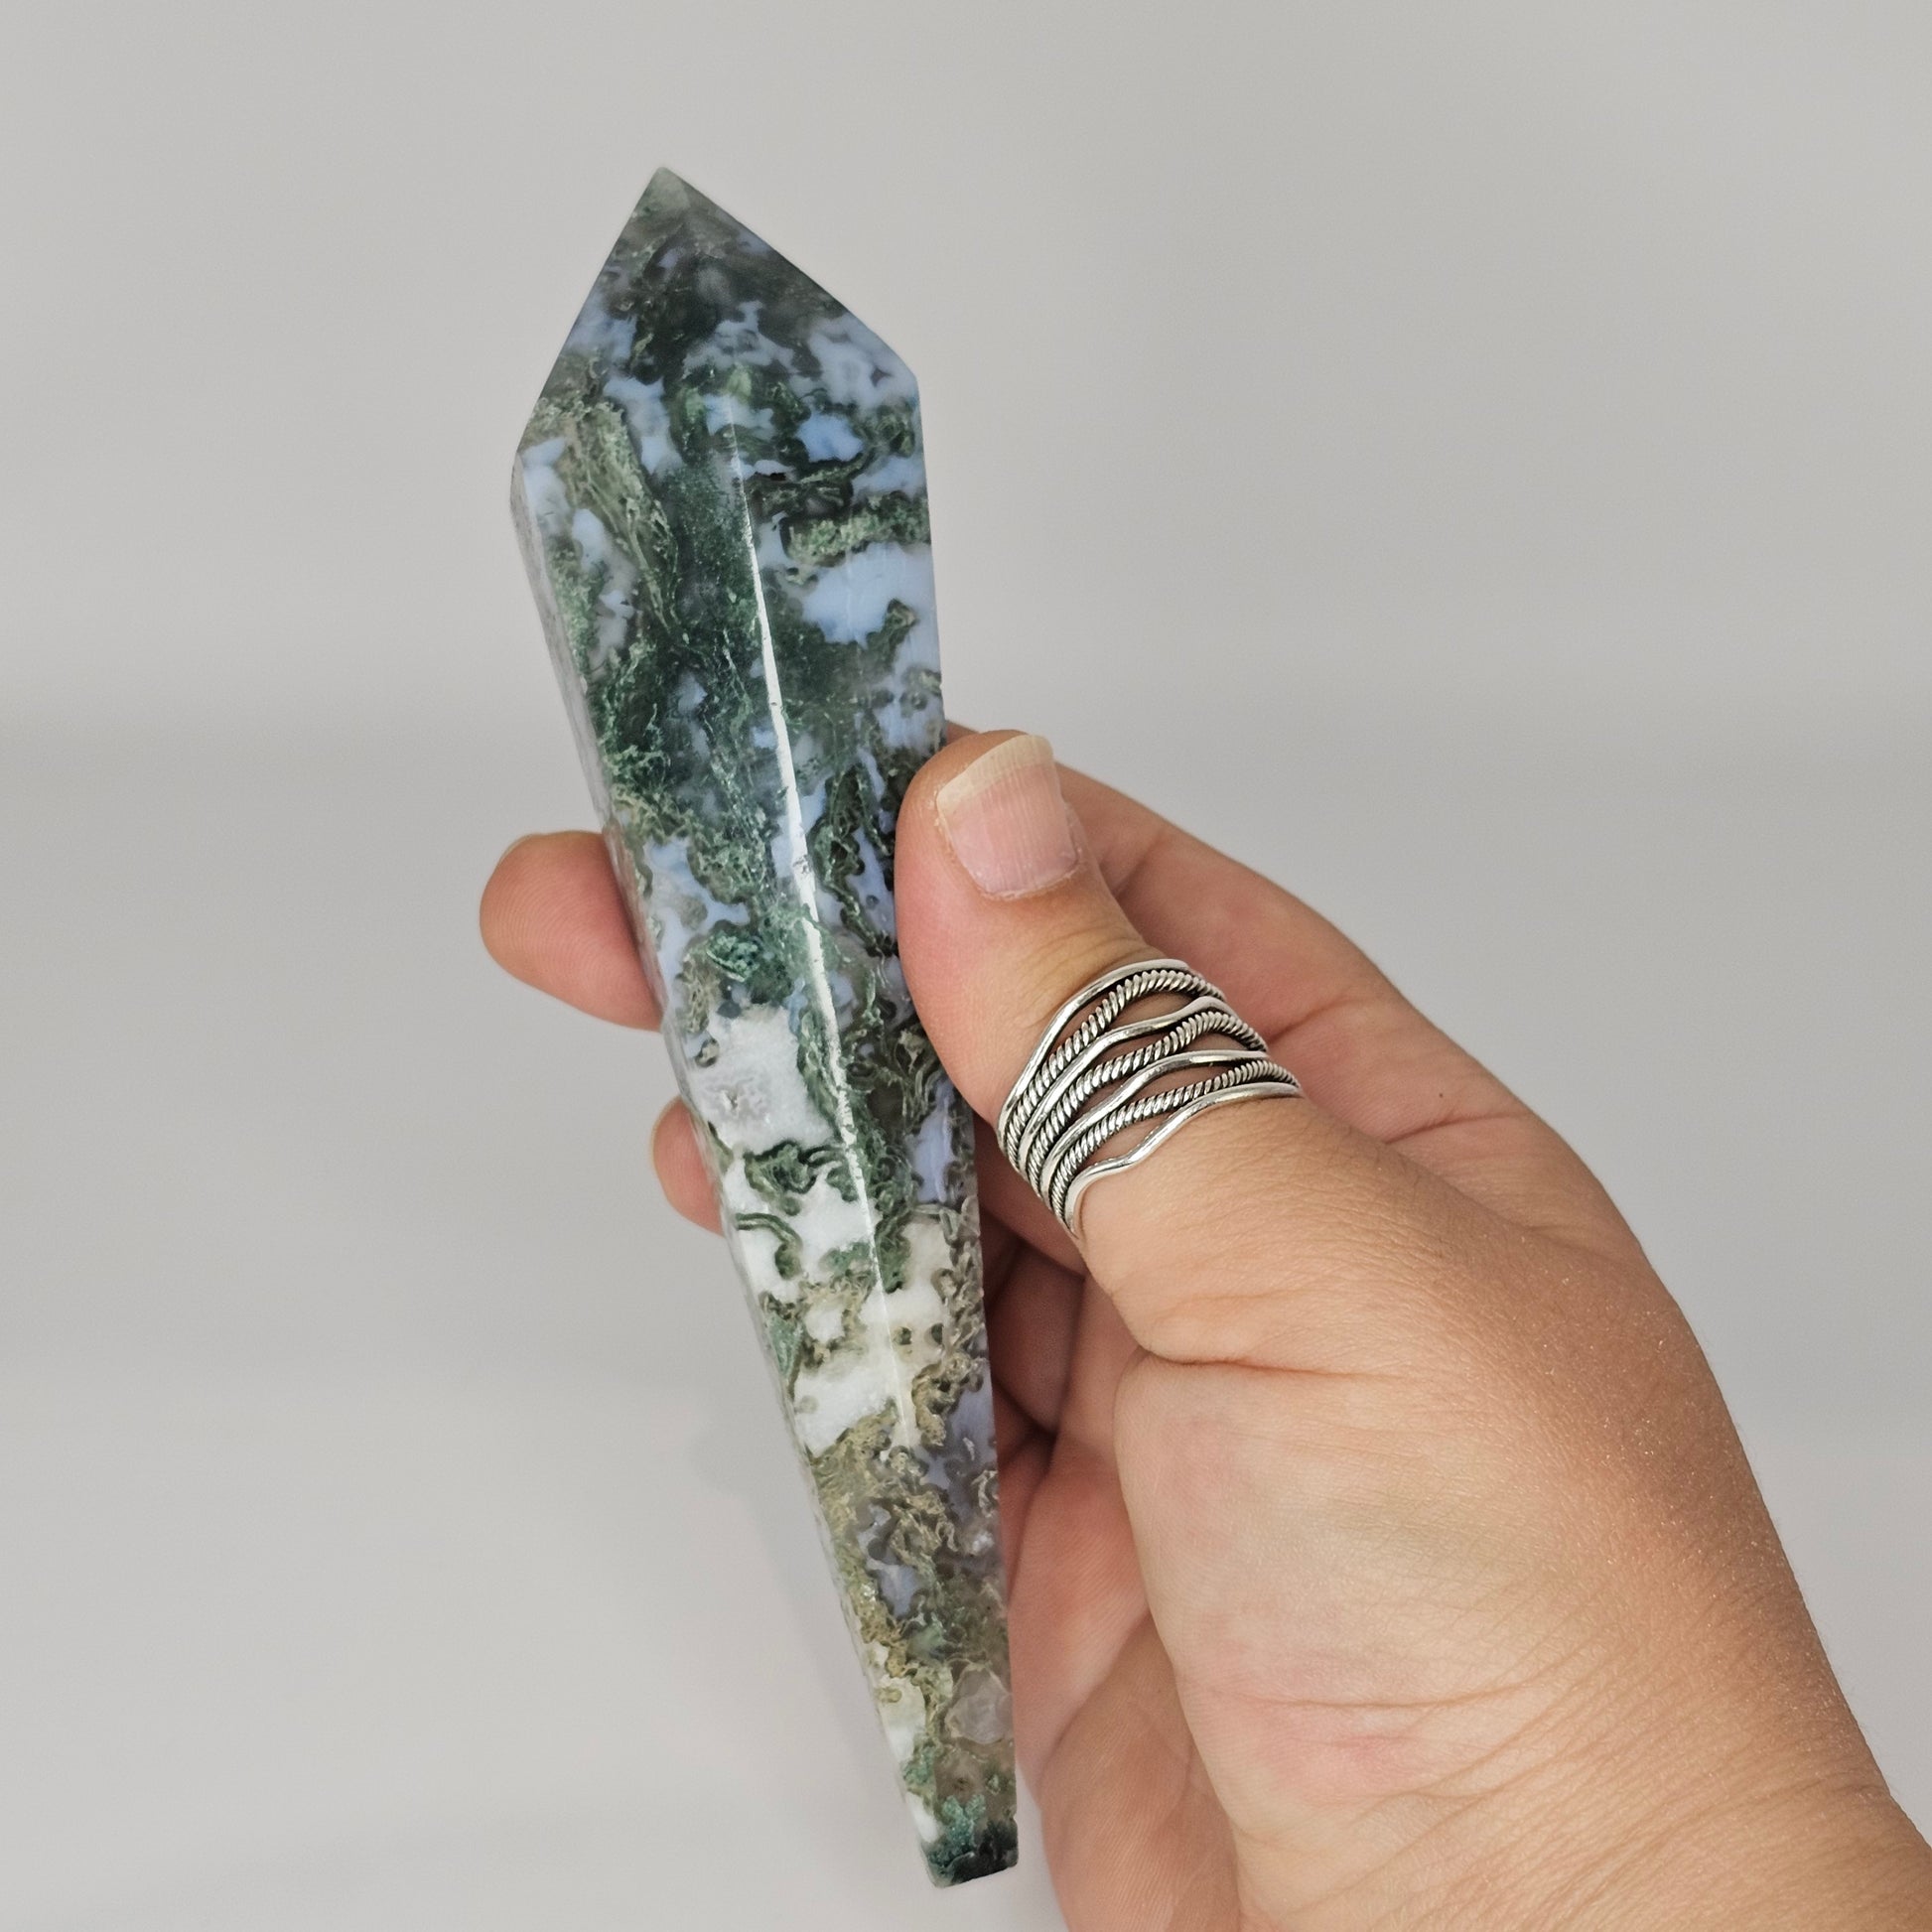 Stunning Moss Agate wand with beautiful blue Chalcedony and Quartz druzy pocket.